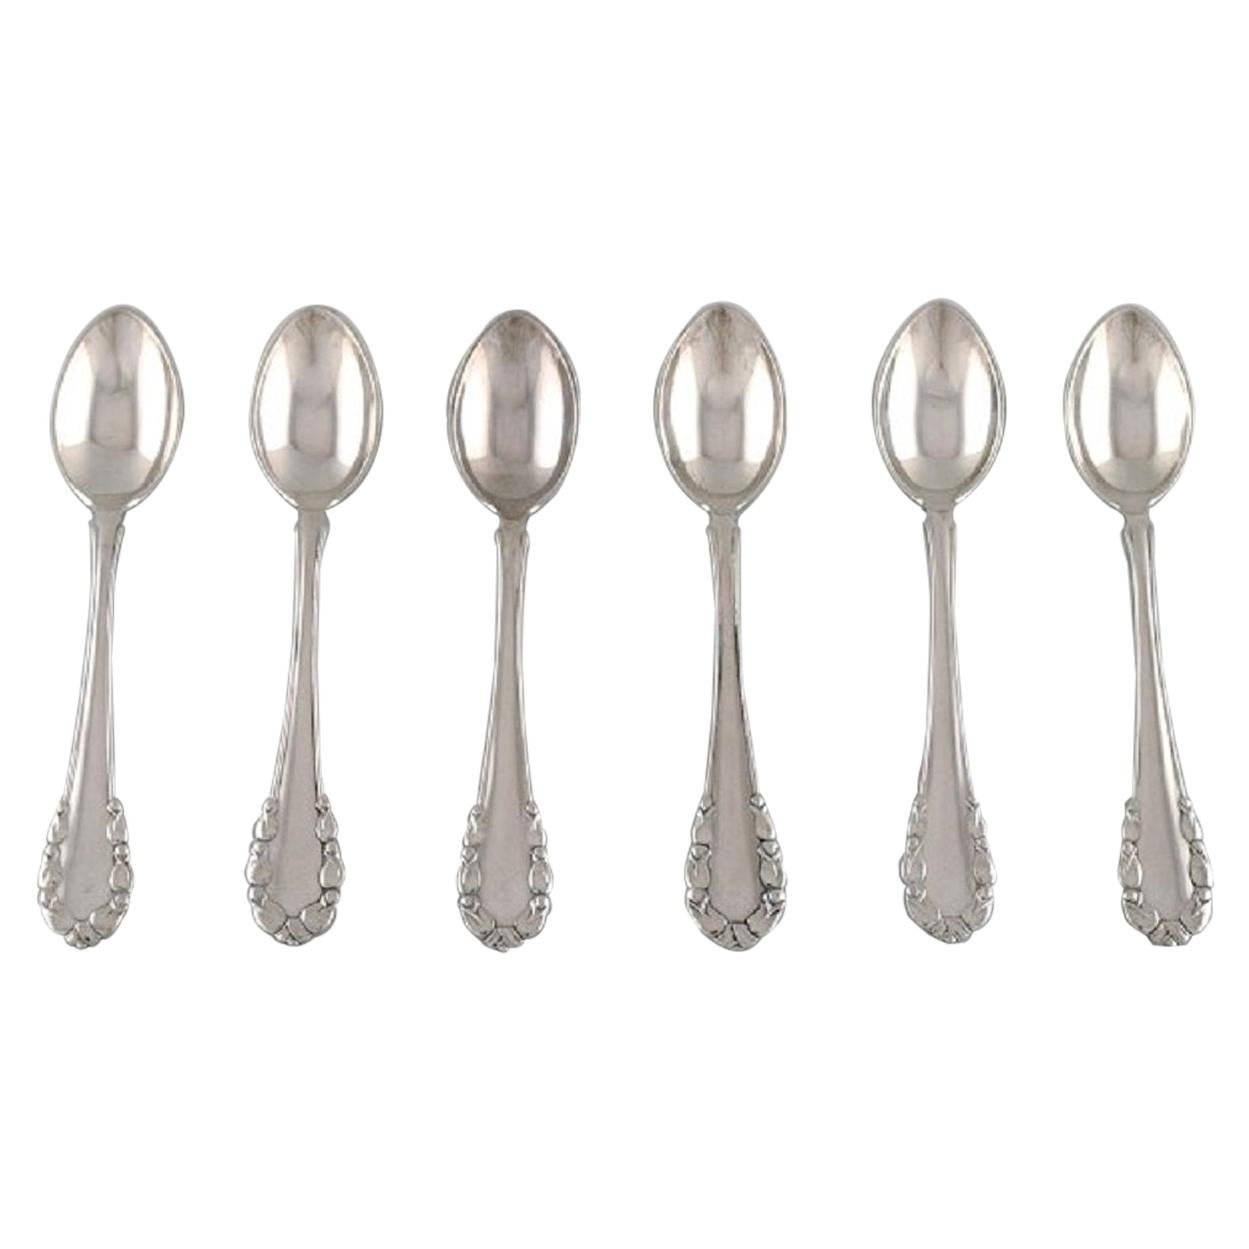 Georg Jensen "Lily of the Valley", Six Coffee Spoons in All Silver, 1915-1930 For Sale